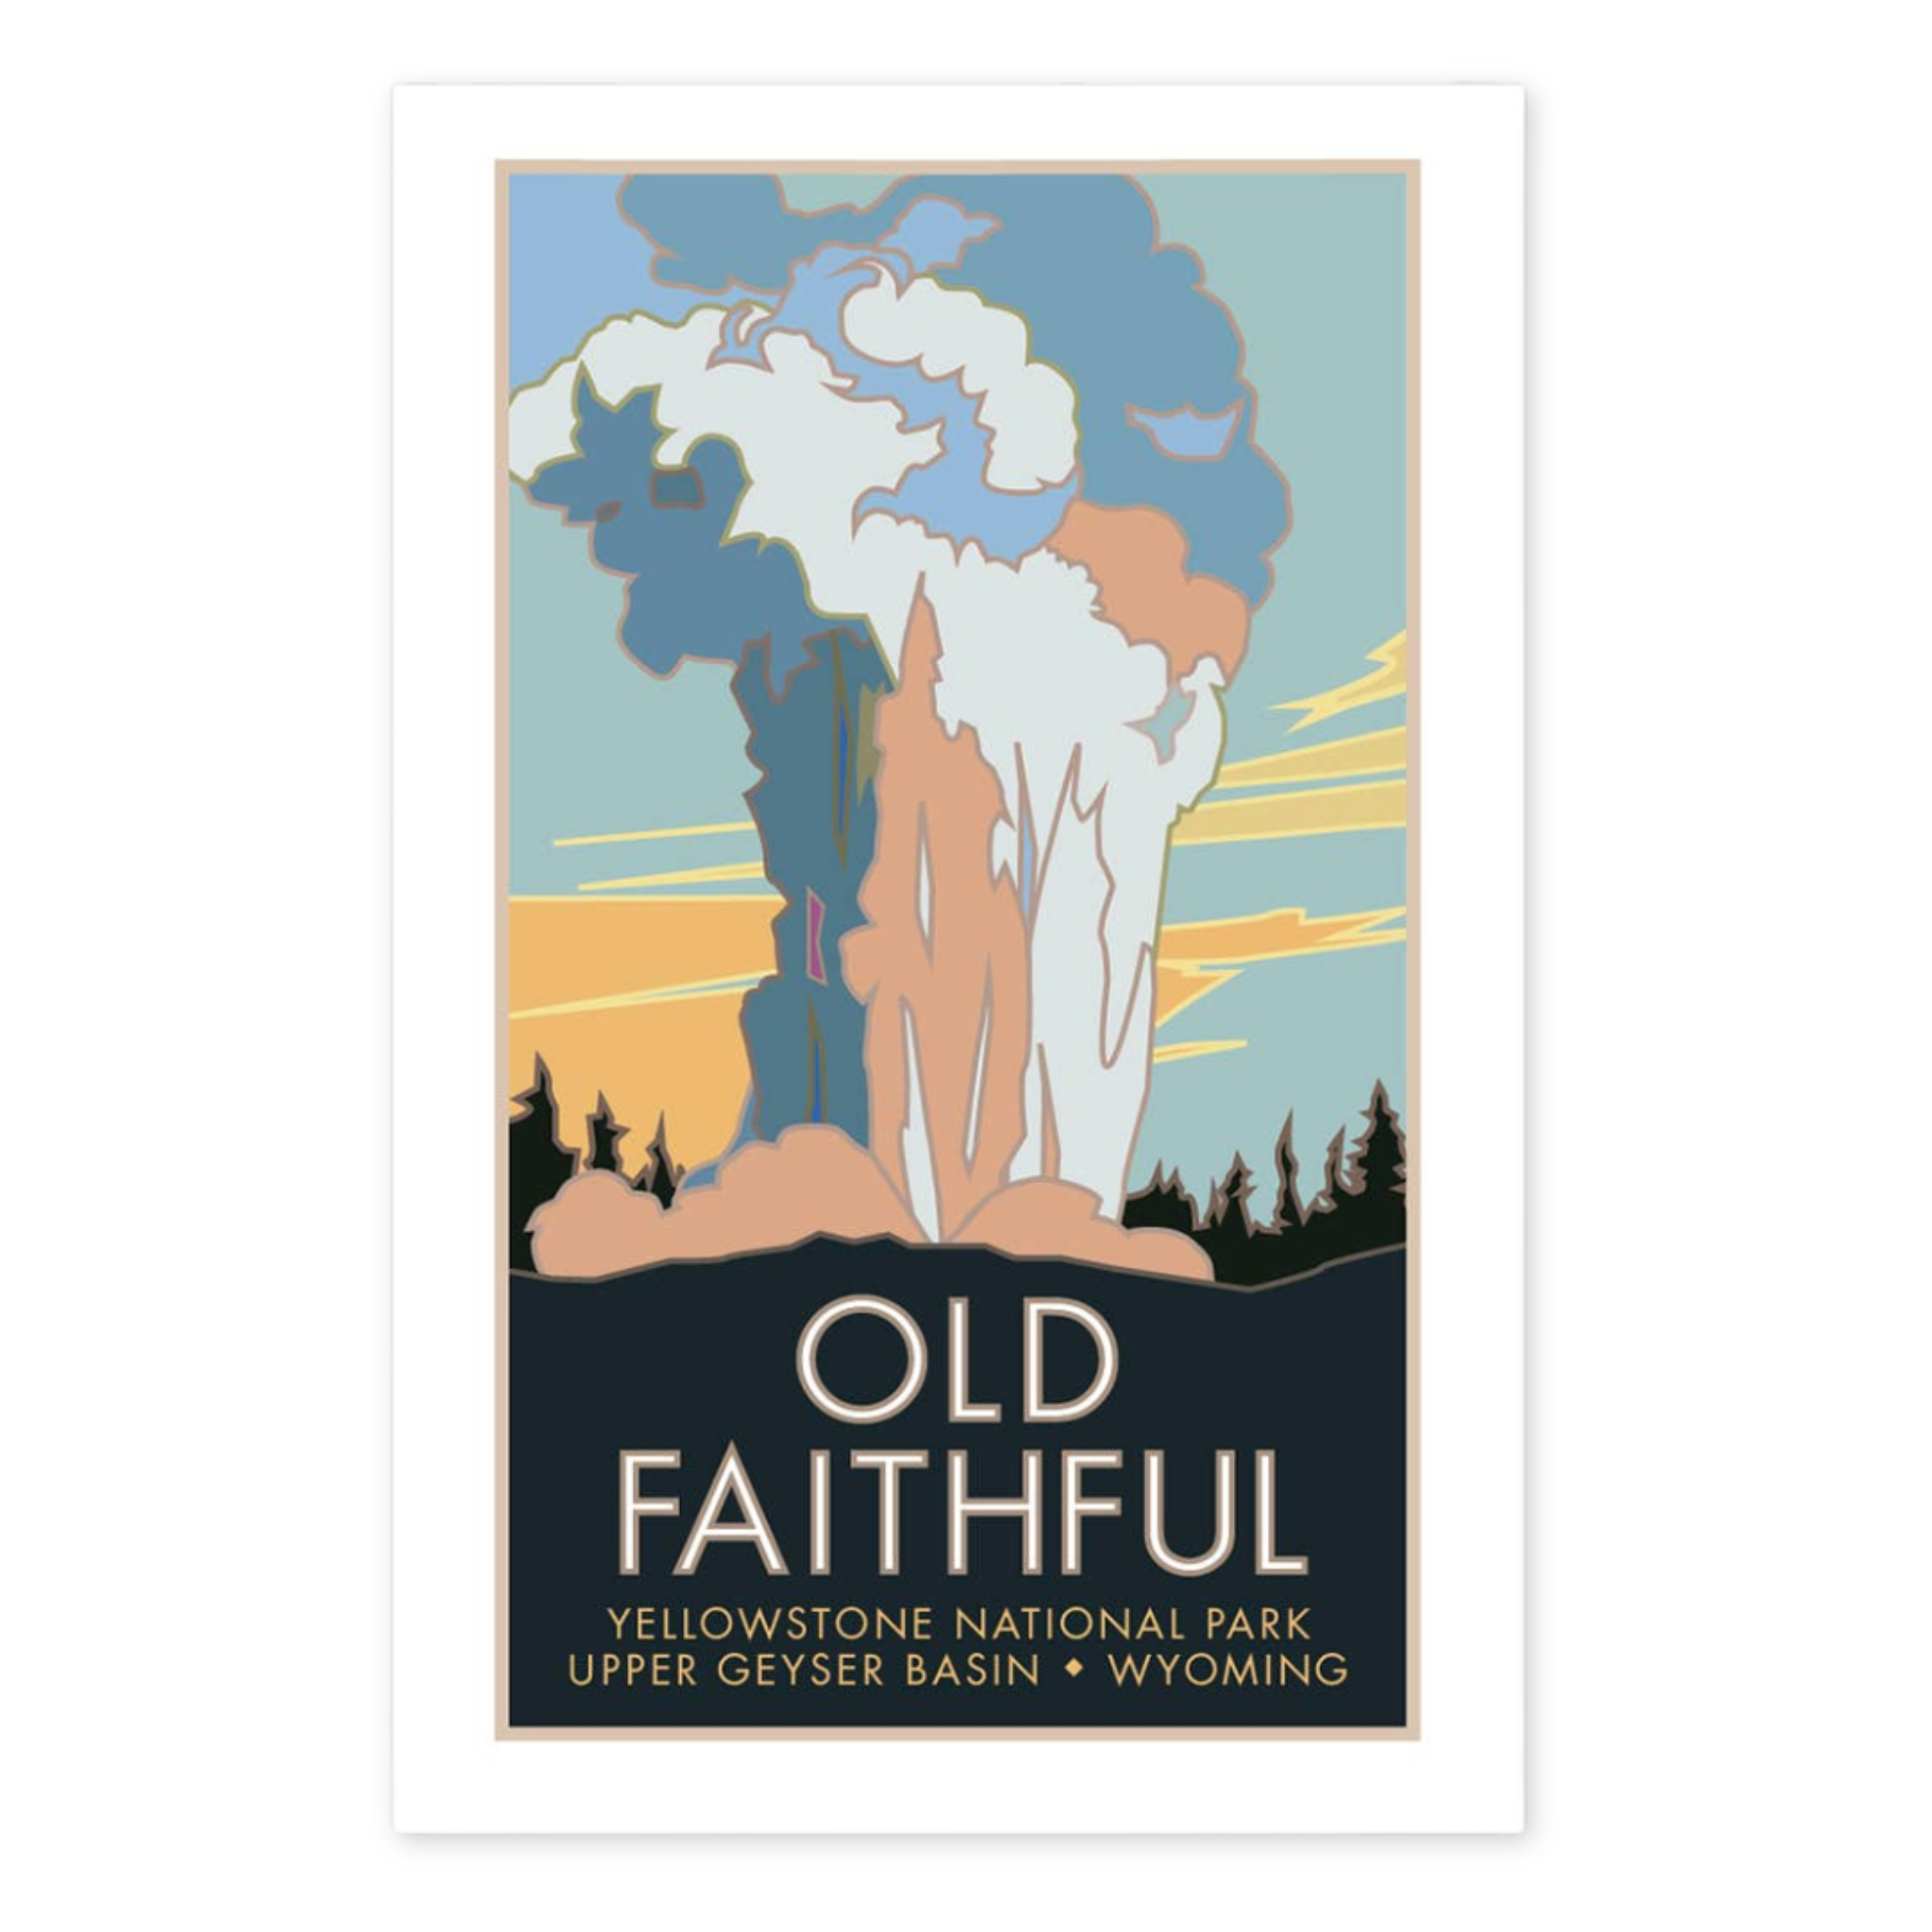 poster with an image of old faithful geyser erupting and old faithful yellowstone national park upper geyser basin wyoming printed on the bottom